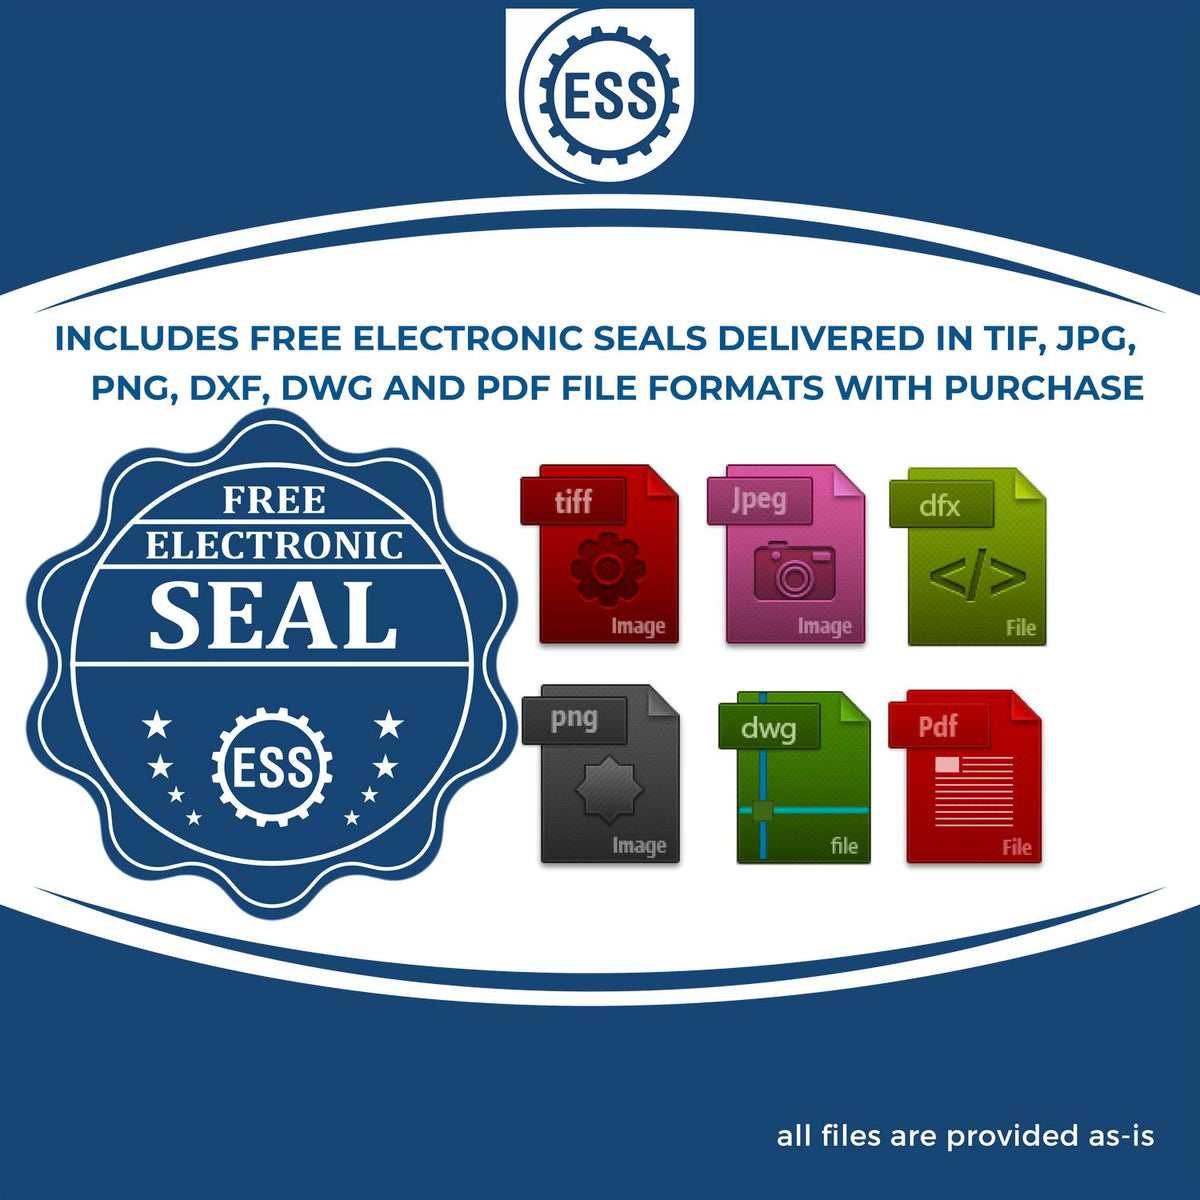 An infographic for the free electronic seal for the Self-Inking Rectangular Missouri Notary Stamp illustrating the different file type icons such as DXF, DWG, TIF, JPG and PNG.